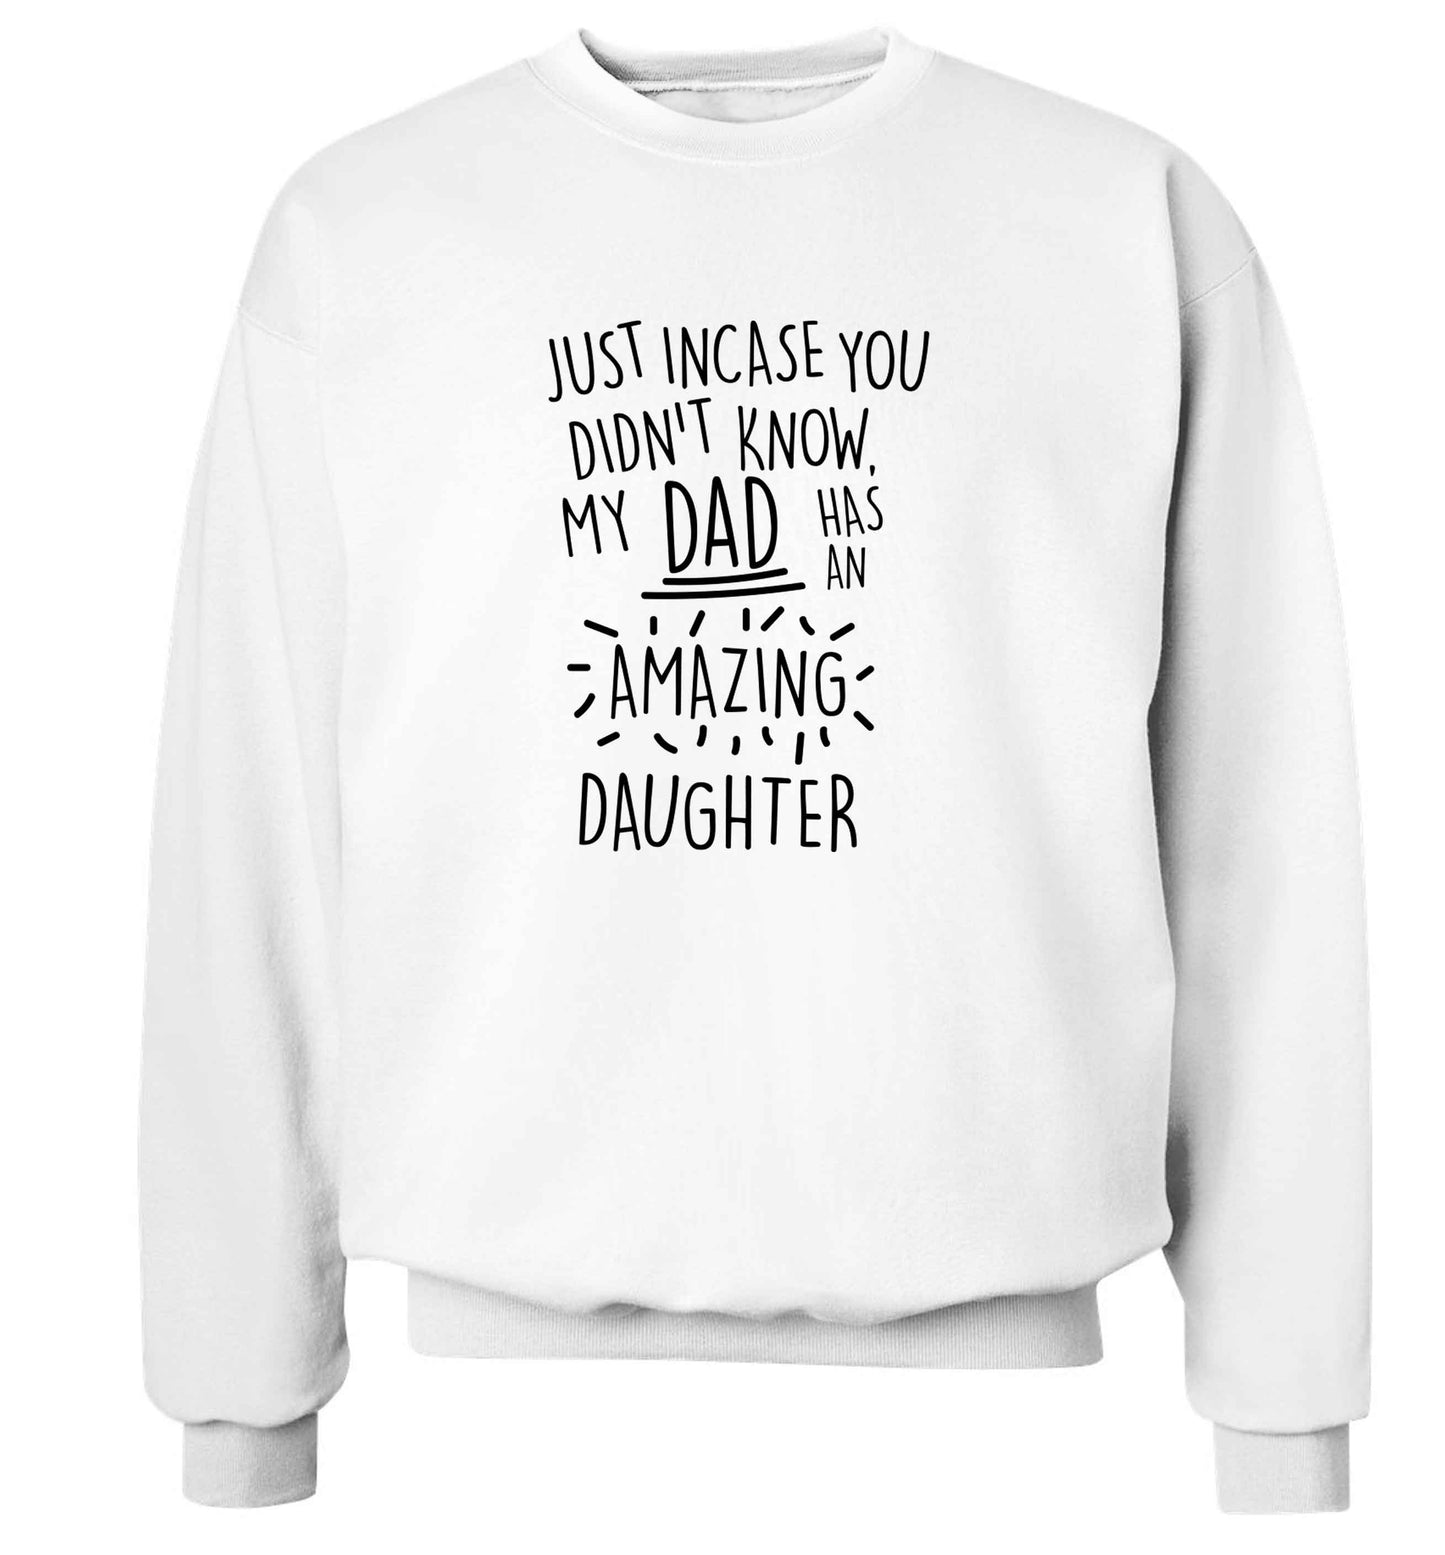 Just incase you didn't know my dad has an amazing daughter adult's unisex white sweater 2XL